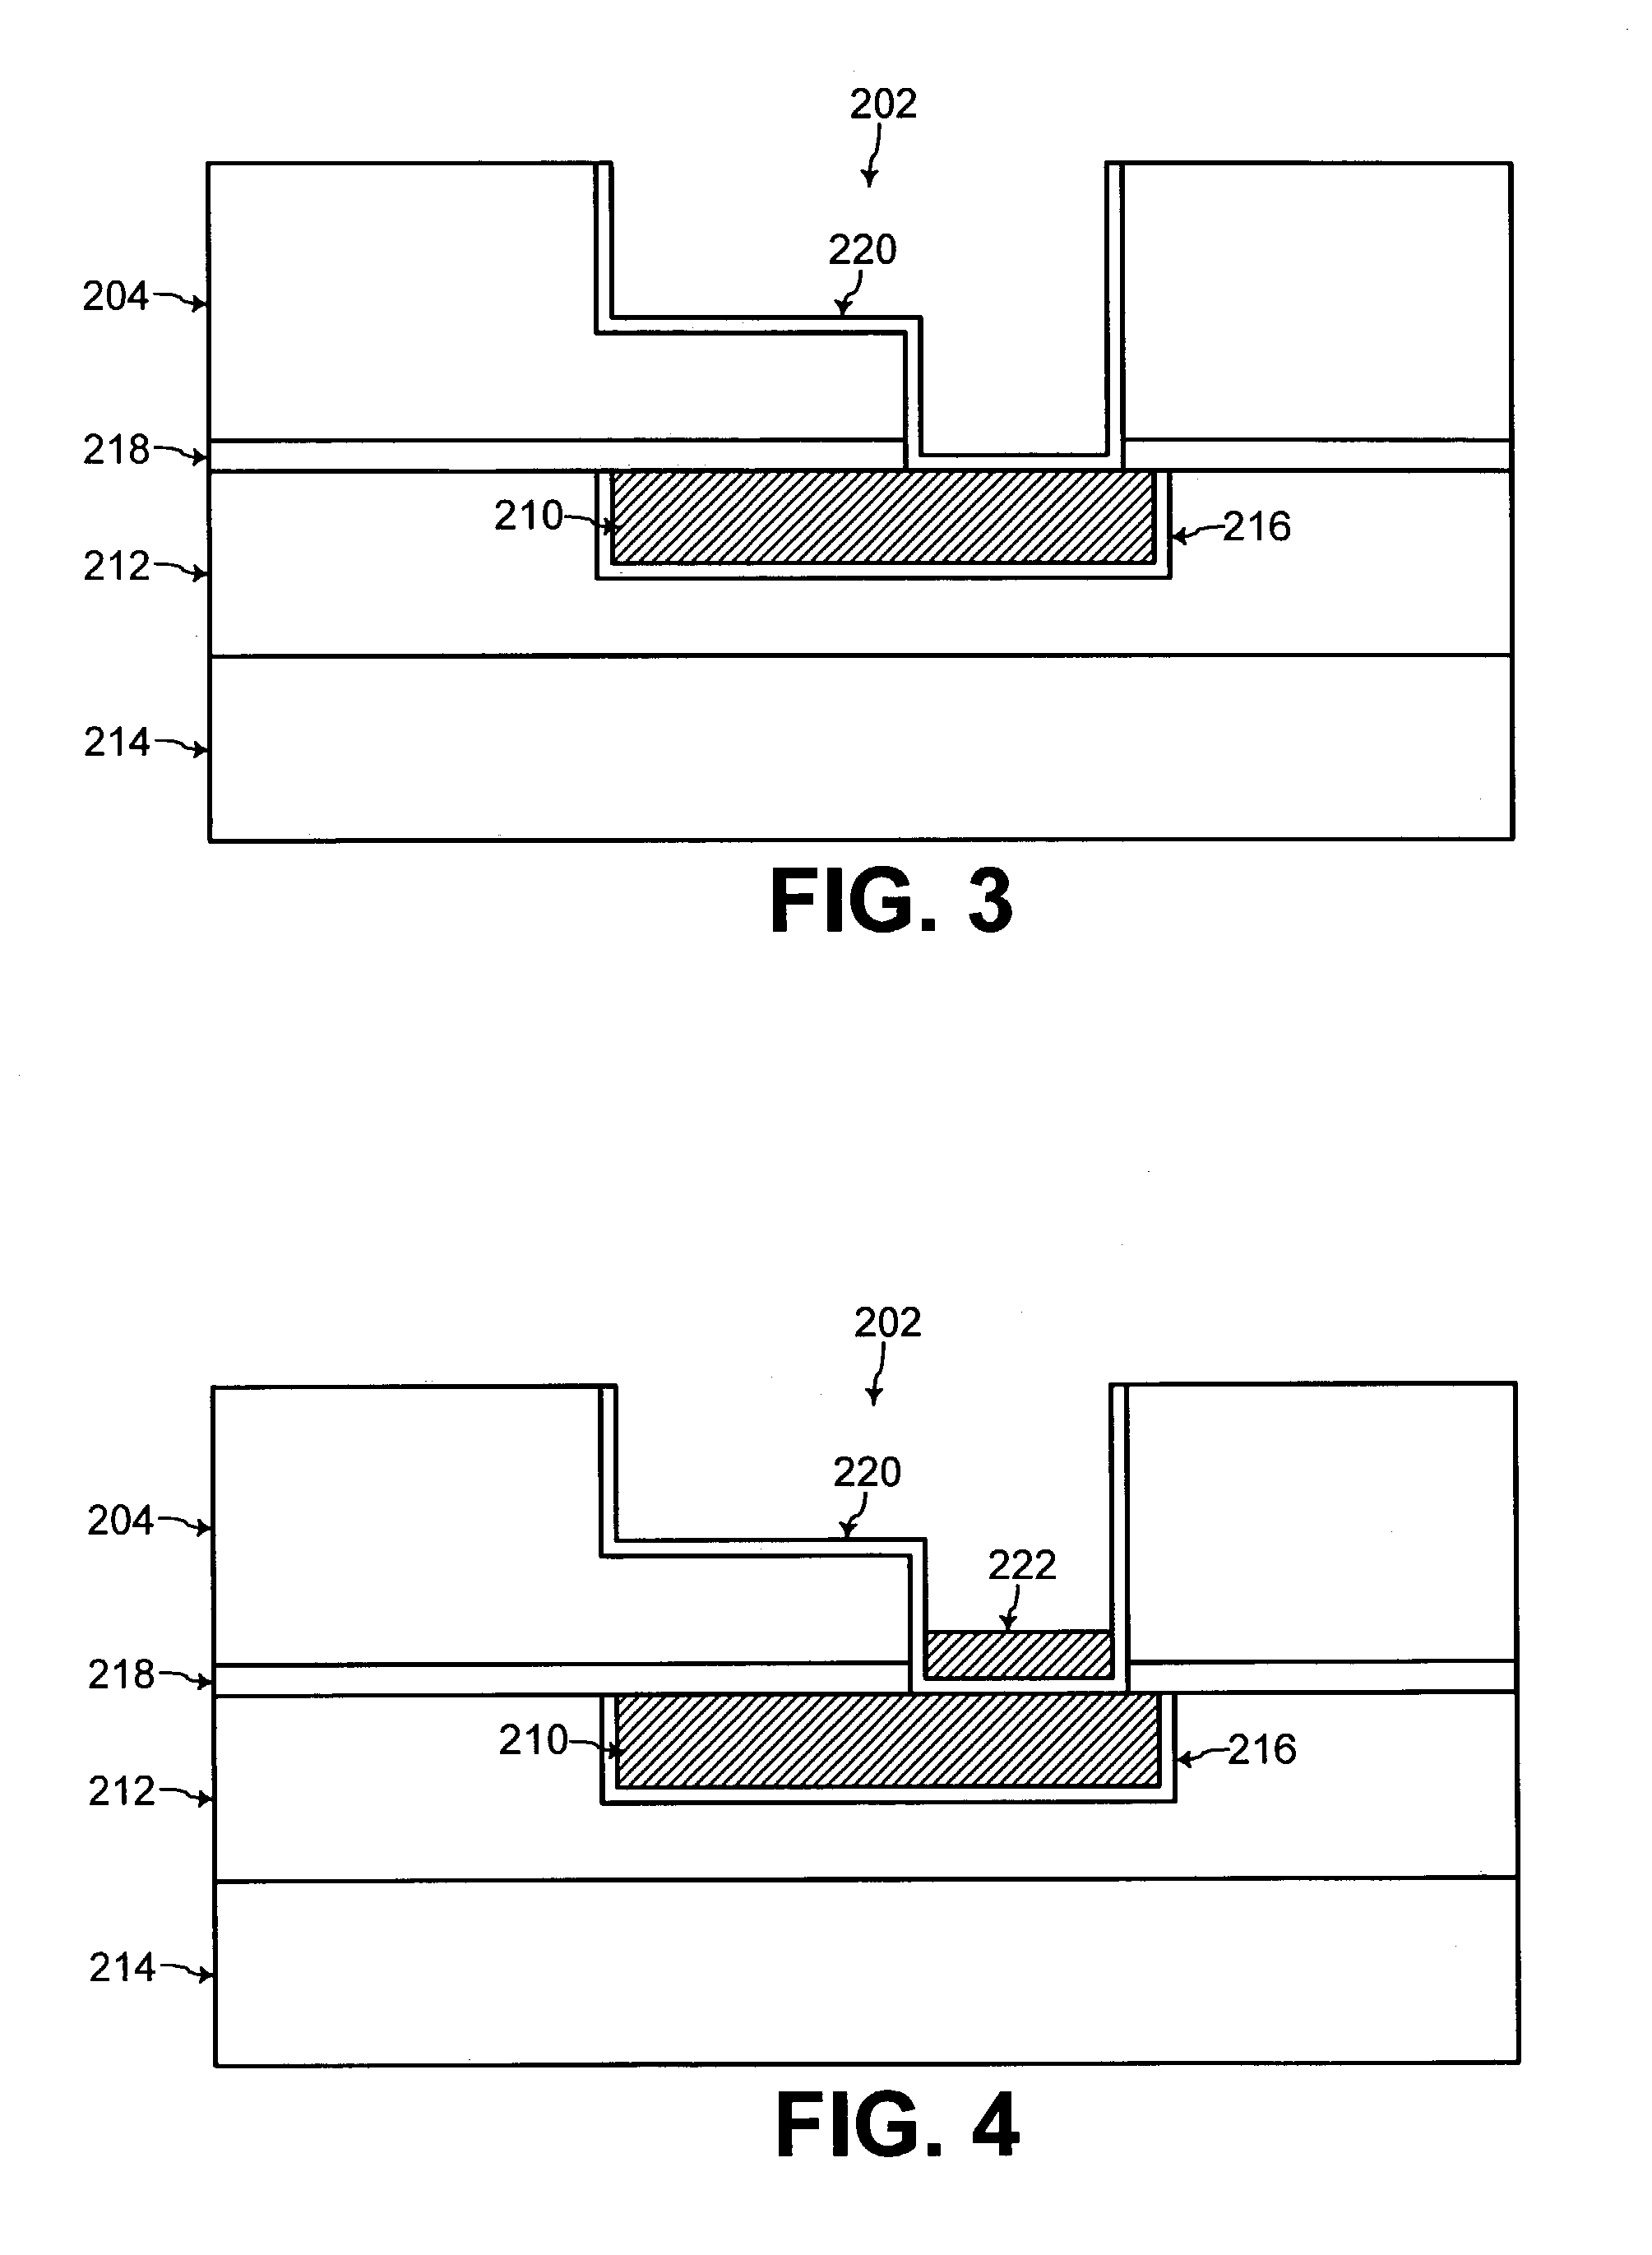 Interconnect with multiple layers of conductive material with grain boundary between the layers